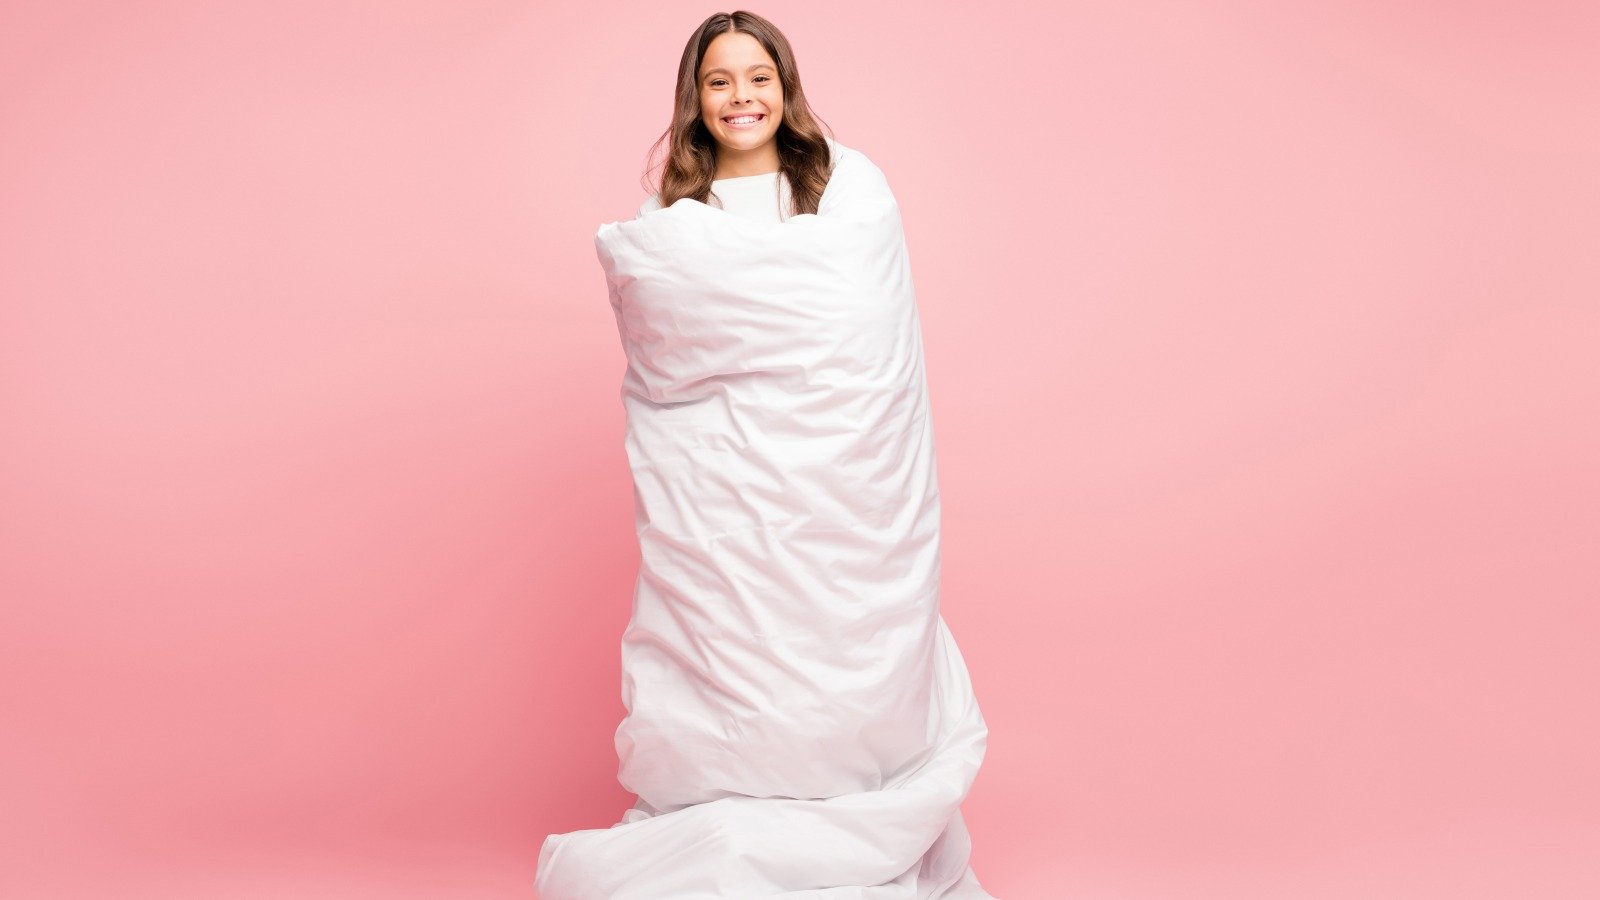 What Really Happens When You Sleep With A Weighted Blanket